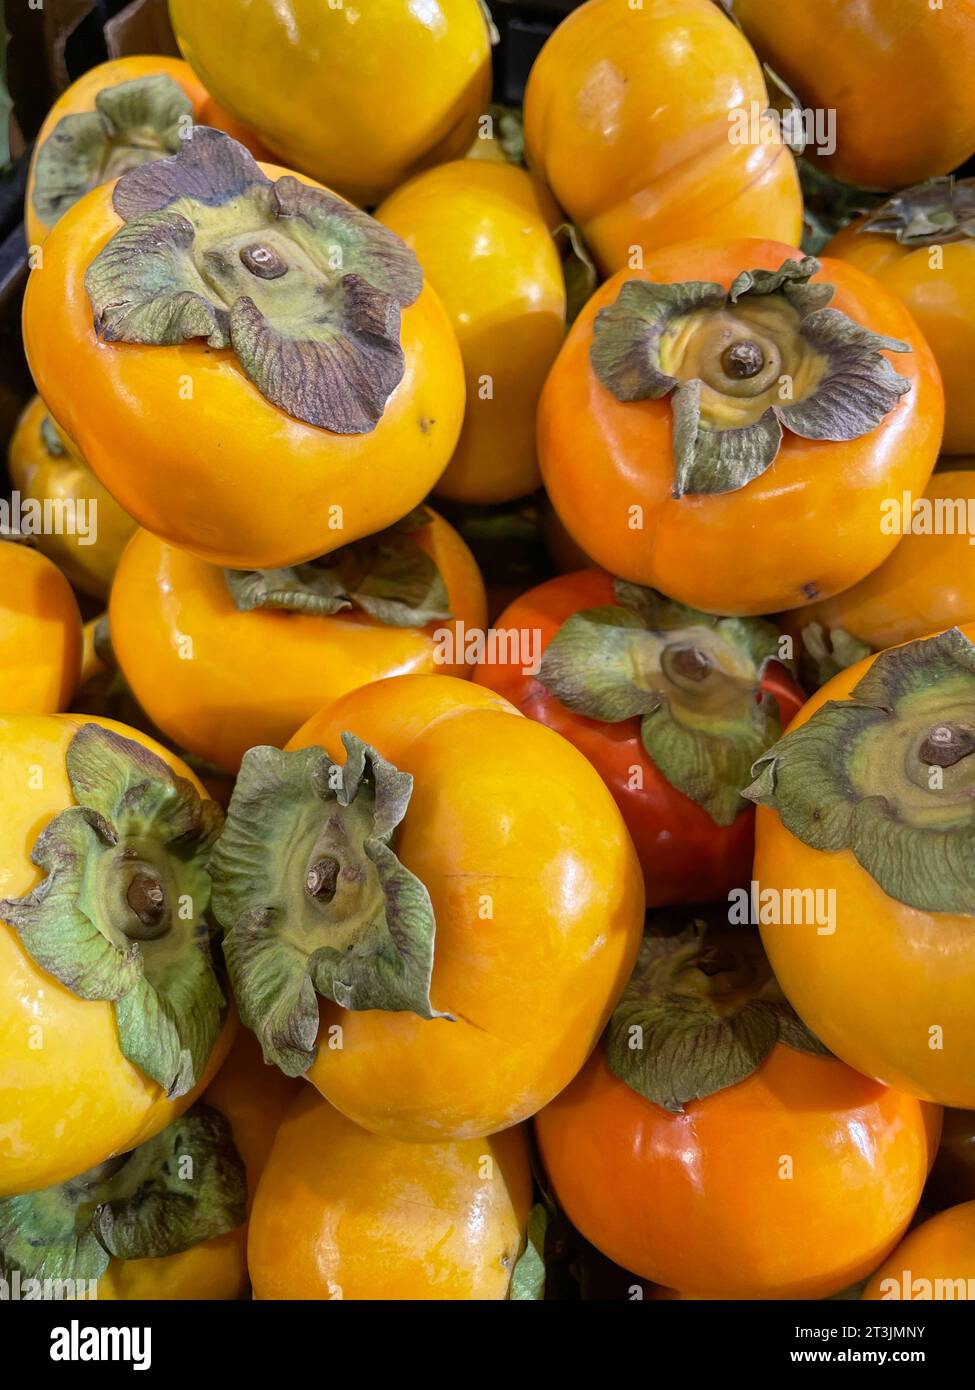 A colorful pile of fresh, ripe persimmons in beautiful shades of yellow, orange, and red. Stock Photo